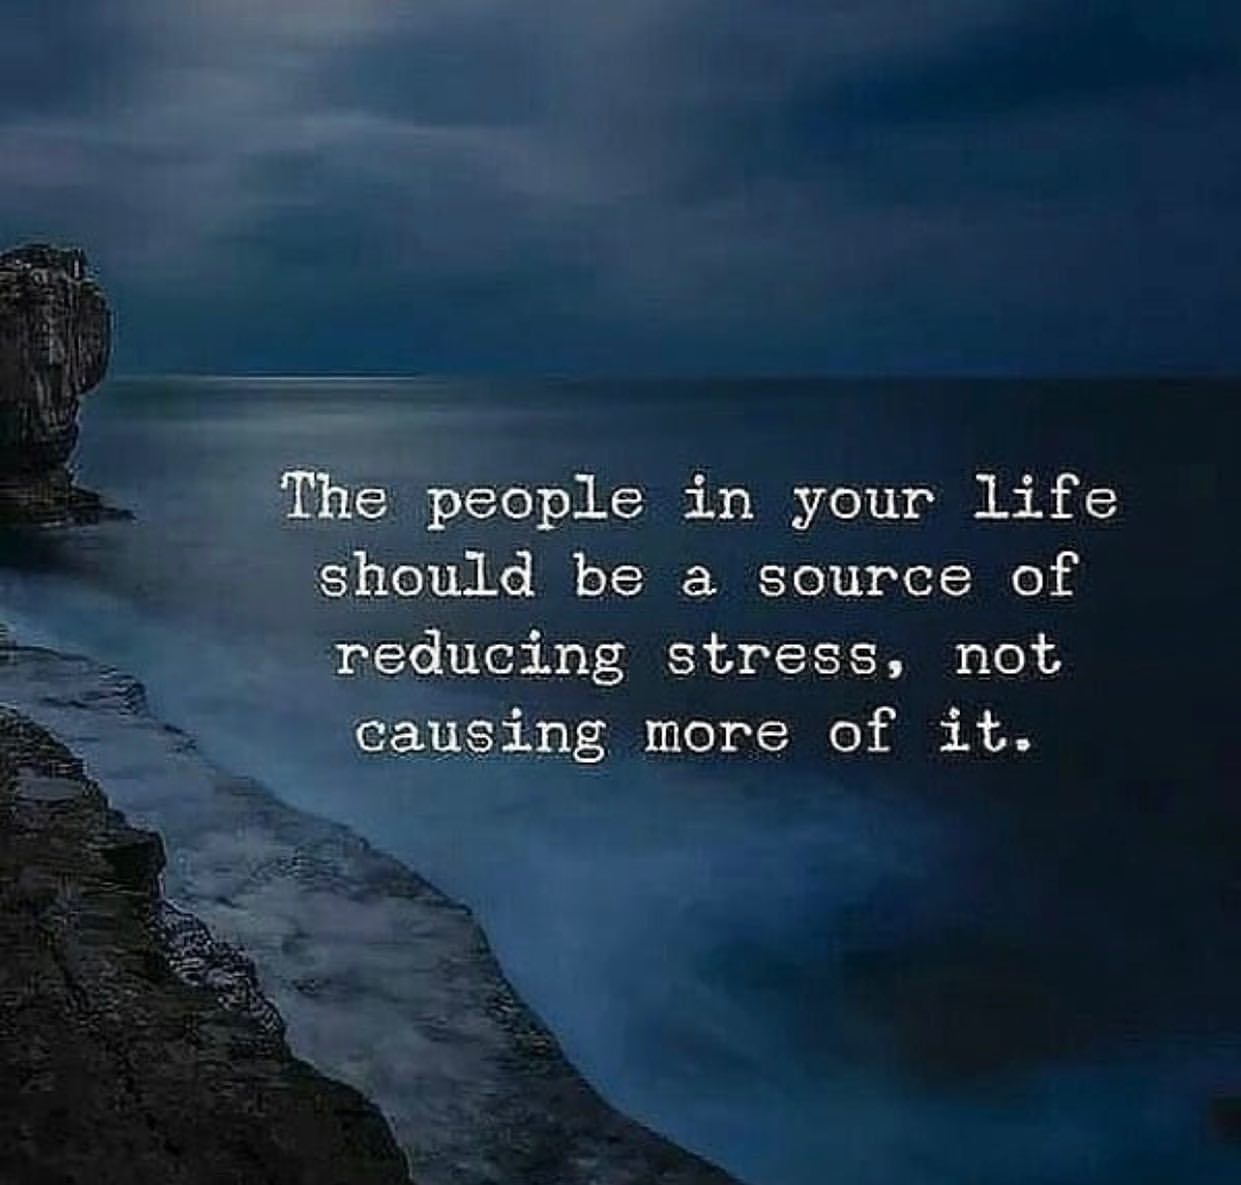 The people in your life should be a source of reducing stress, not causing more of it.